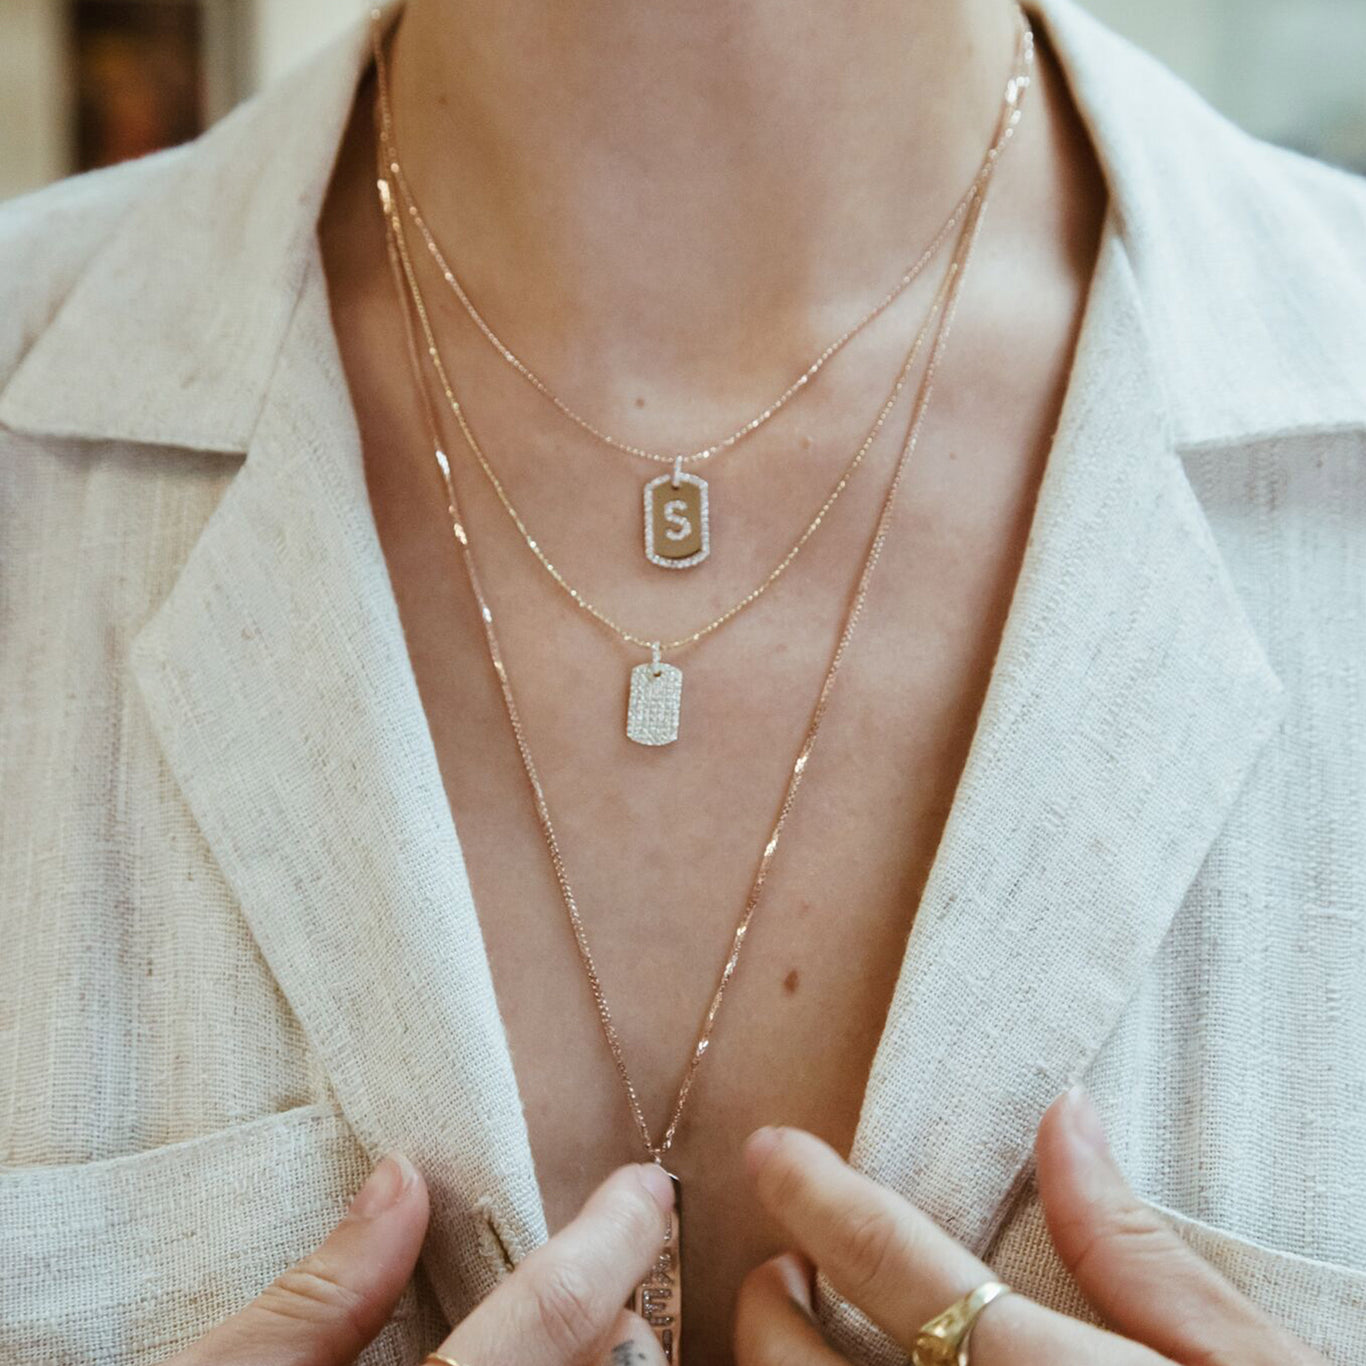 The Initial Dogtag shown beautifully layered with the Diamond Dogtag and Longtag Necklace. A must have look!